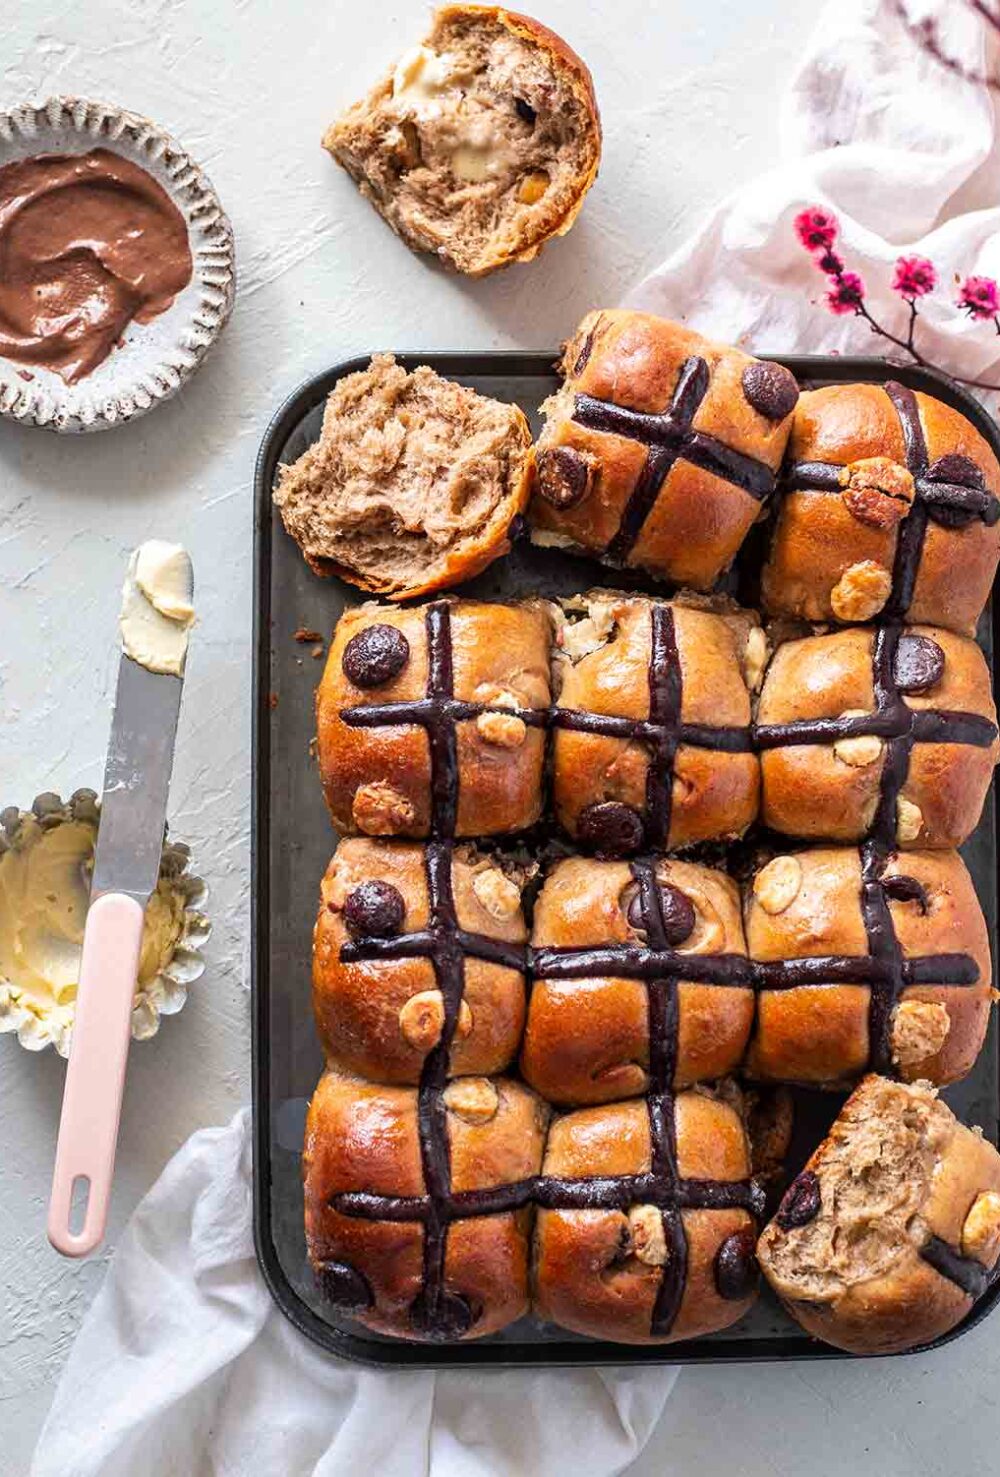 Double chocolate chip hot cross buns on baking tray. Two hot cross bun are cut open and has butter spread on one side. The other side is exposed showing soft bread and melting chocolate chips.